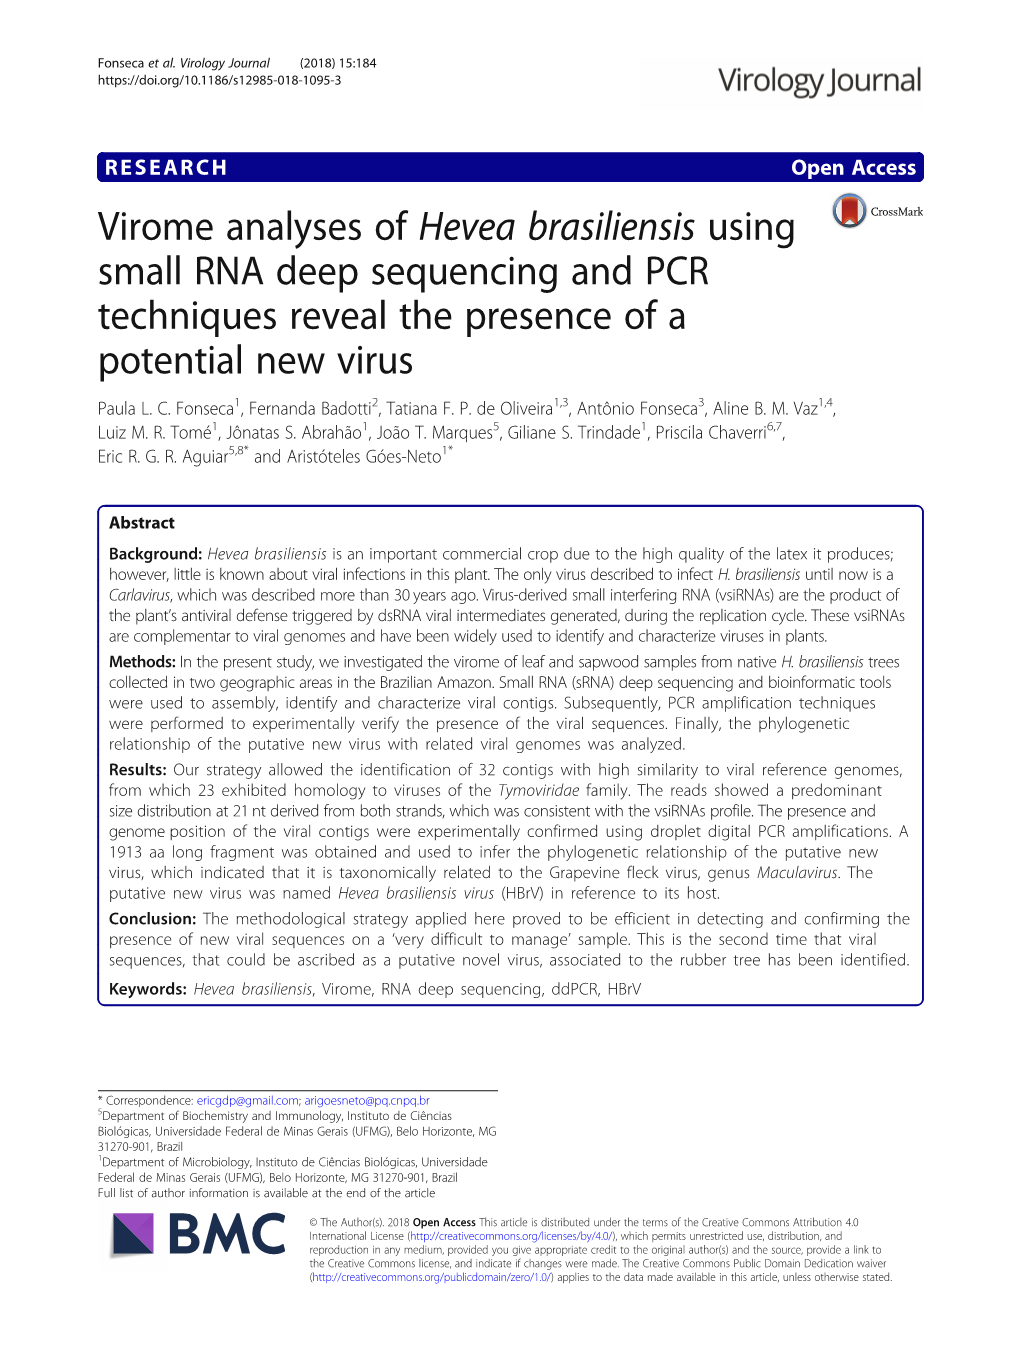 Virome Analyses of Hevea Brasiliensis Using Small RNA Deep Sequencing and PCR Techniques Reveal the Presence of a Potential New Virus Paula L